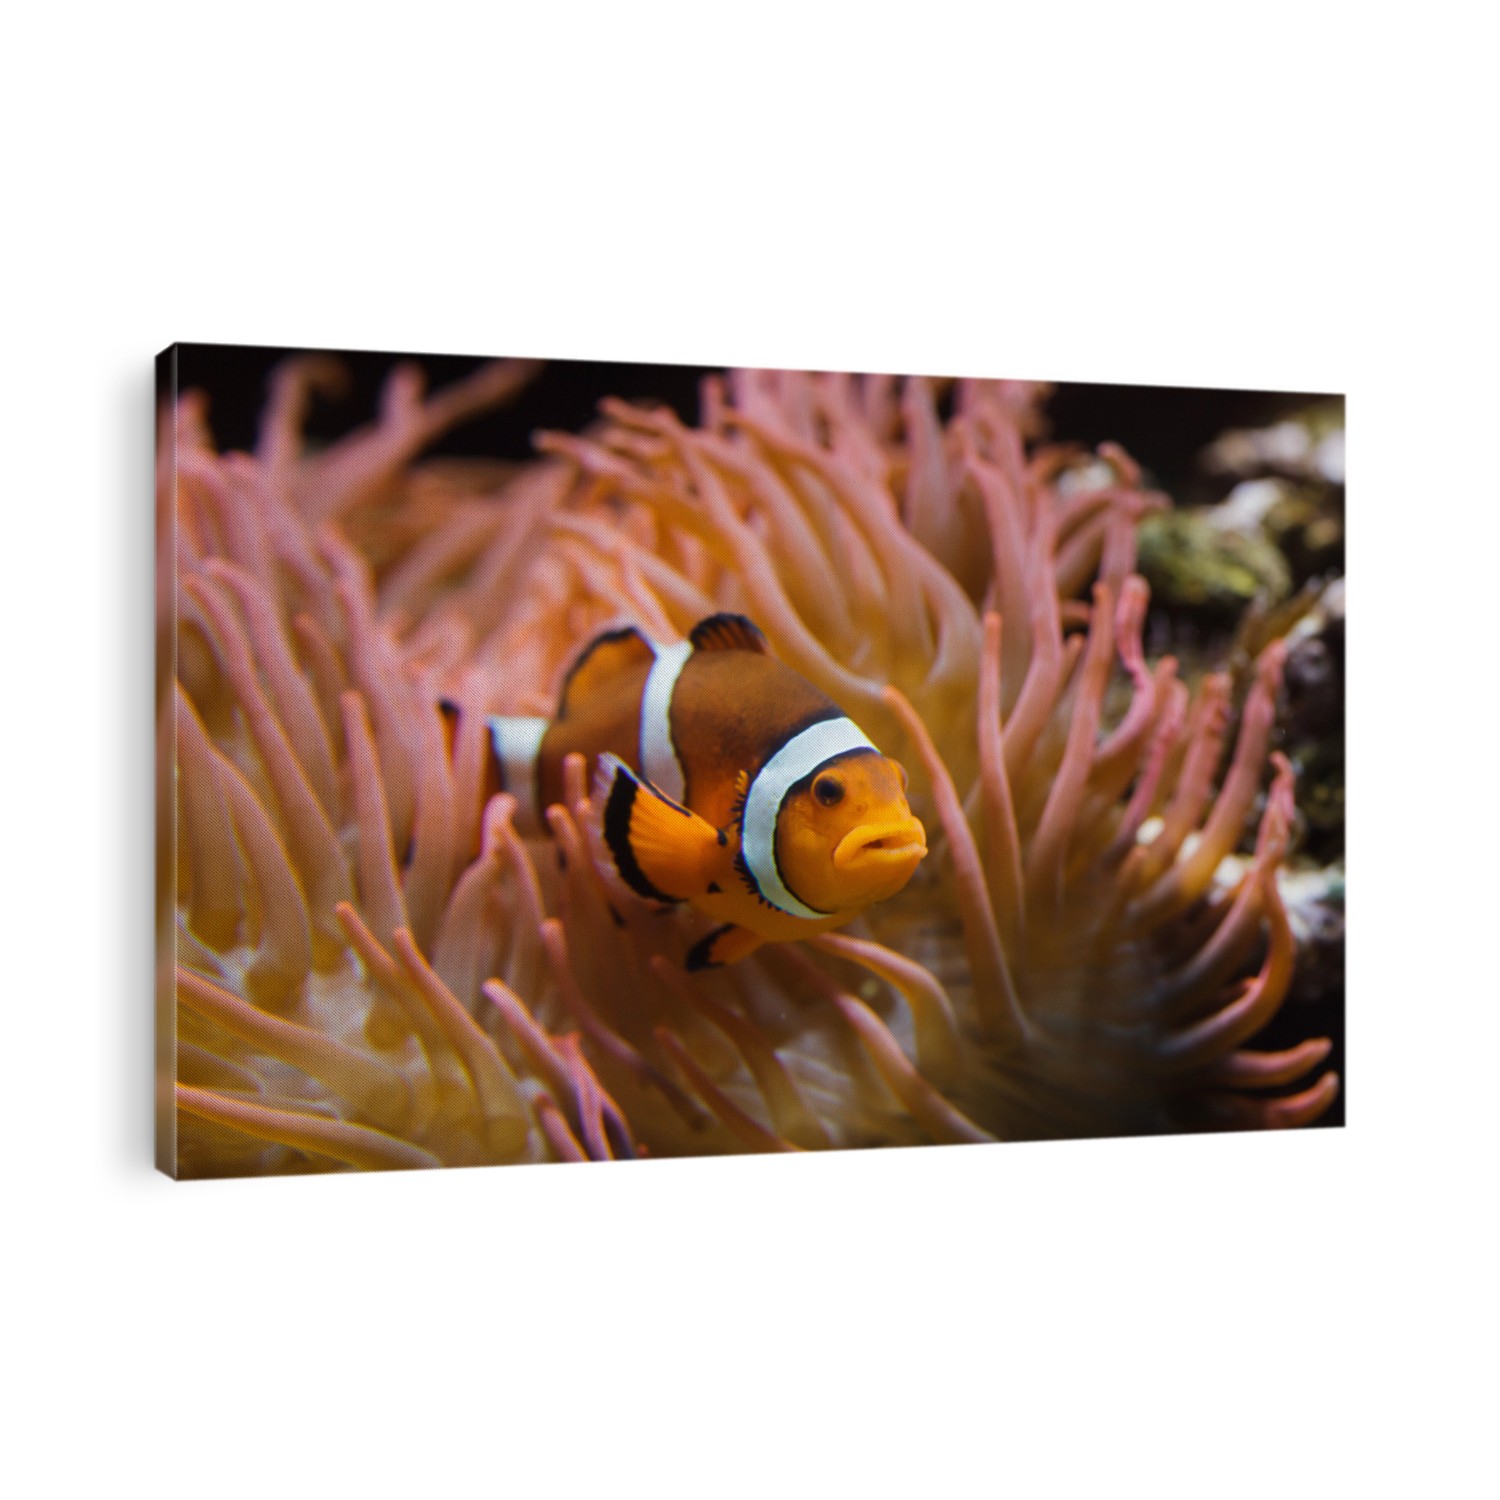 Ocellaris clownfish (Amphiprion ocellaris), also known as the false percula clownfish, swimming in the magnificent sea anemone (Heteractis magnifica).